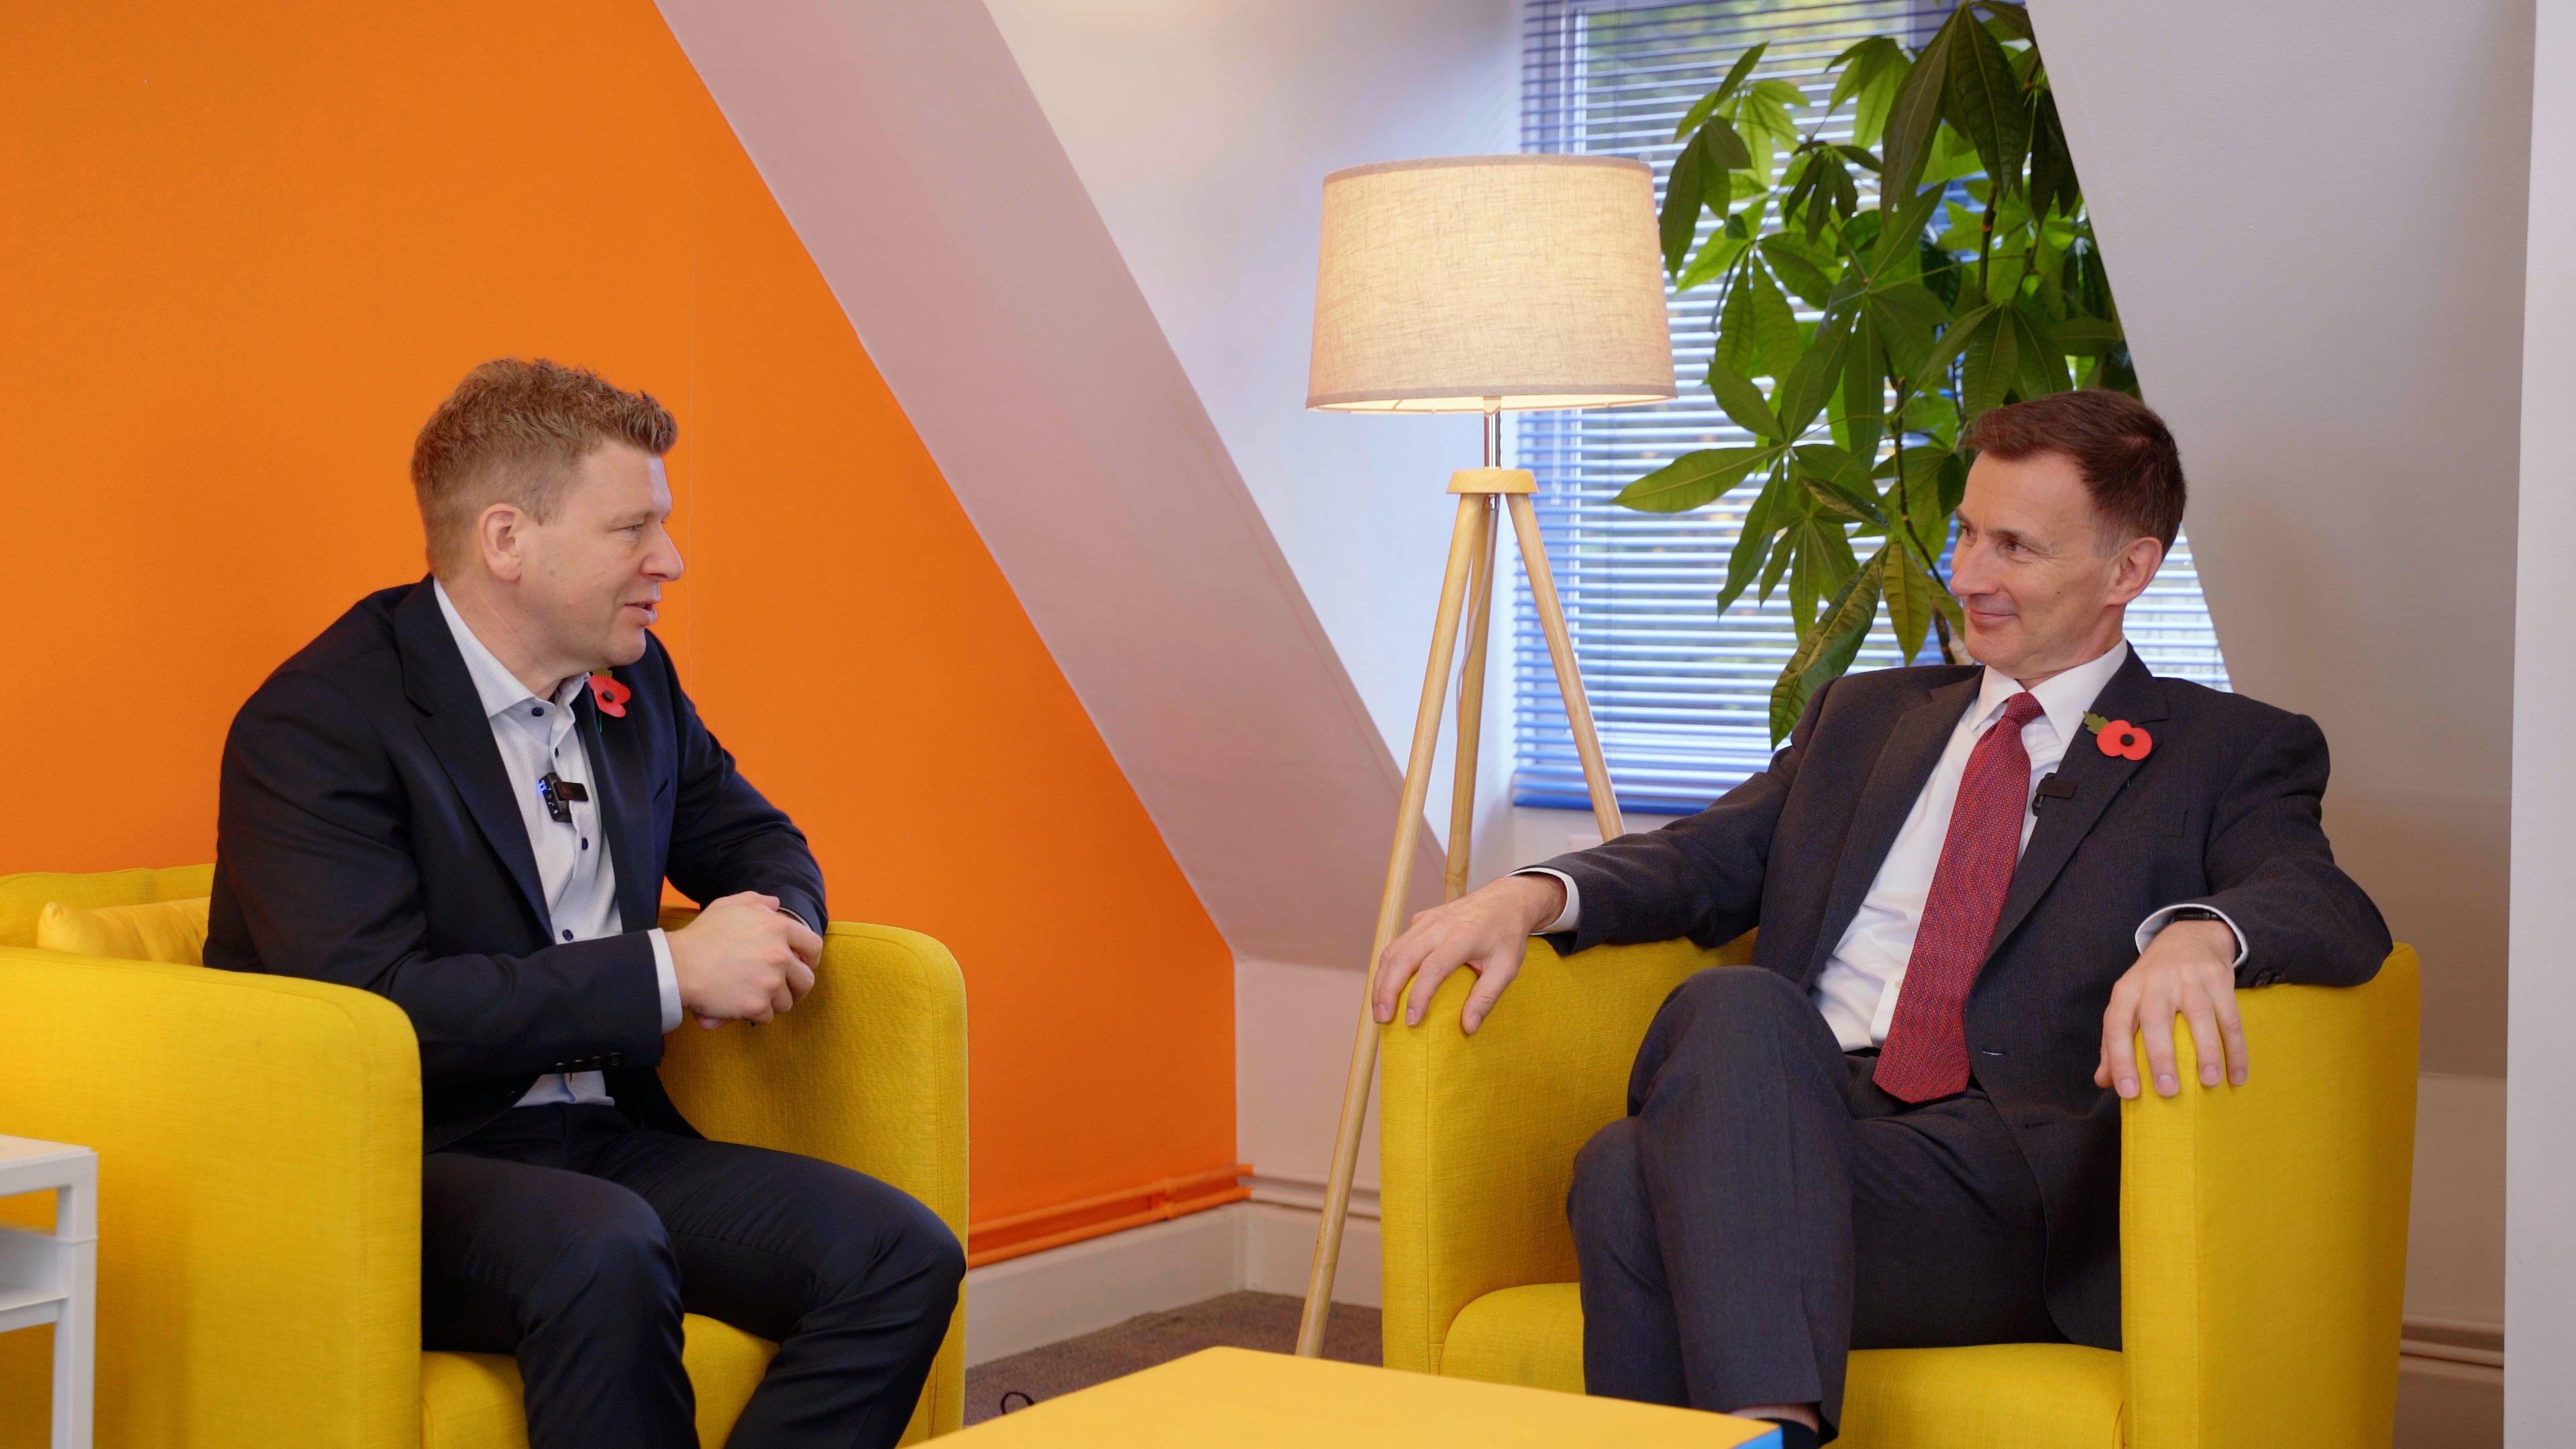 In the Innovation Visual office, Tim Butler, CEO of Innovation Visual sits down with Jeremy Hunt to record an episode of Digital Marketing Answered.